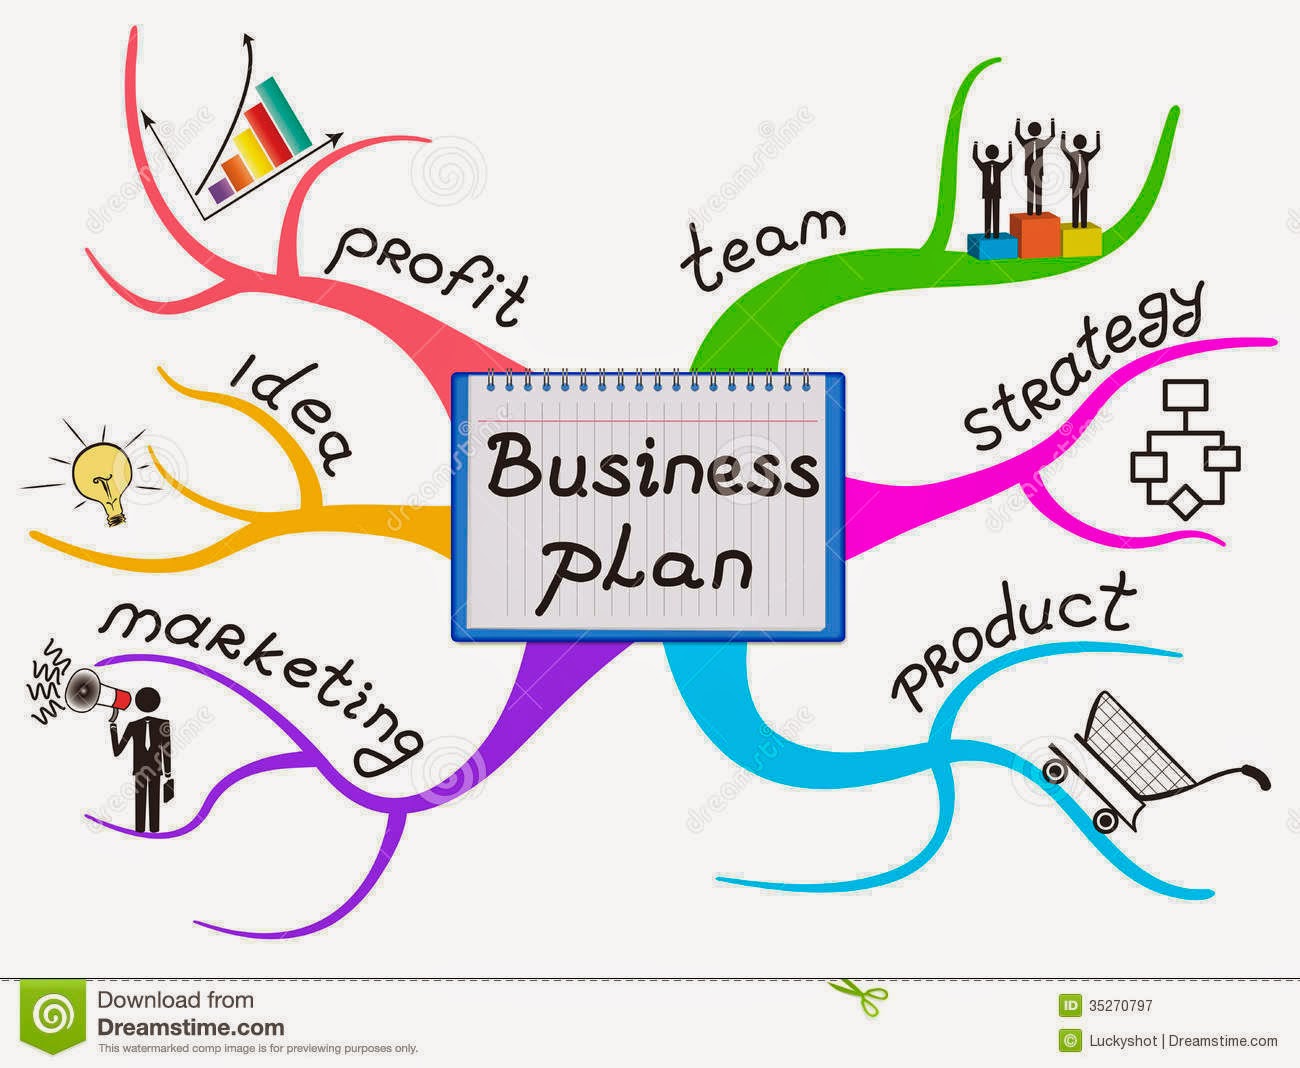 House business plan